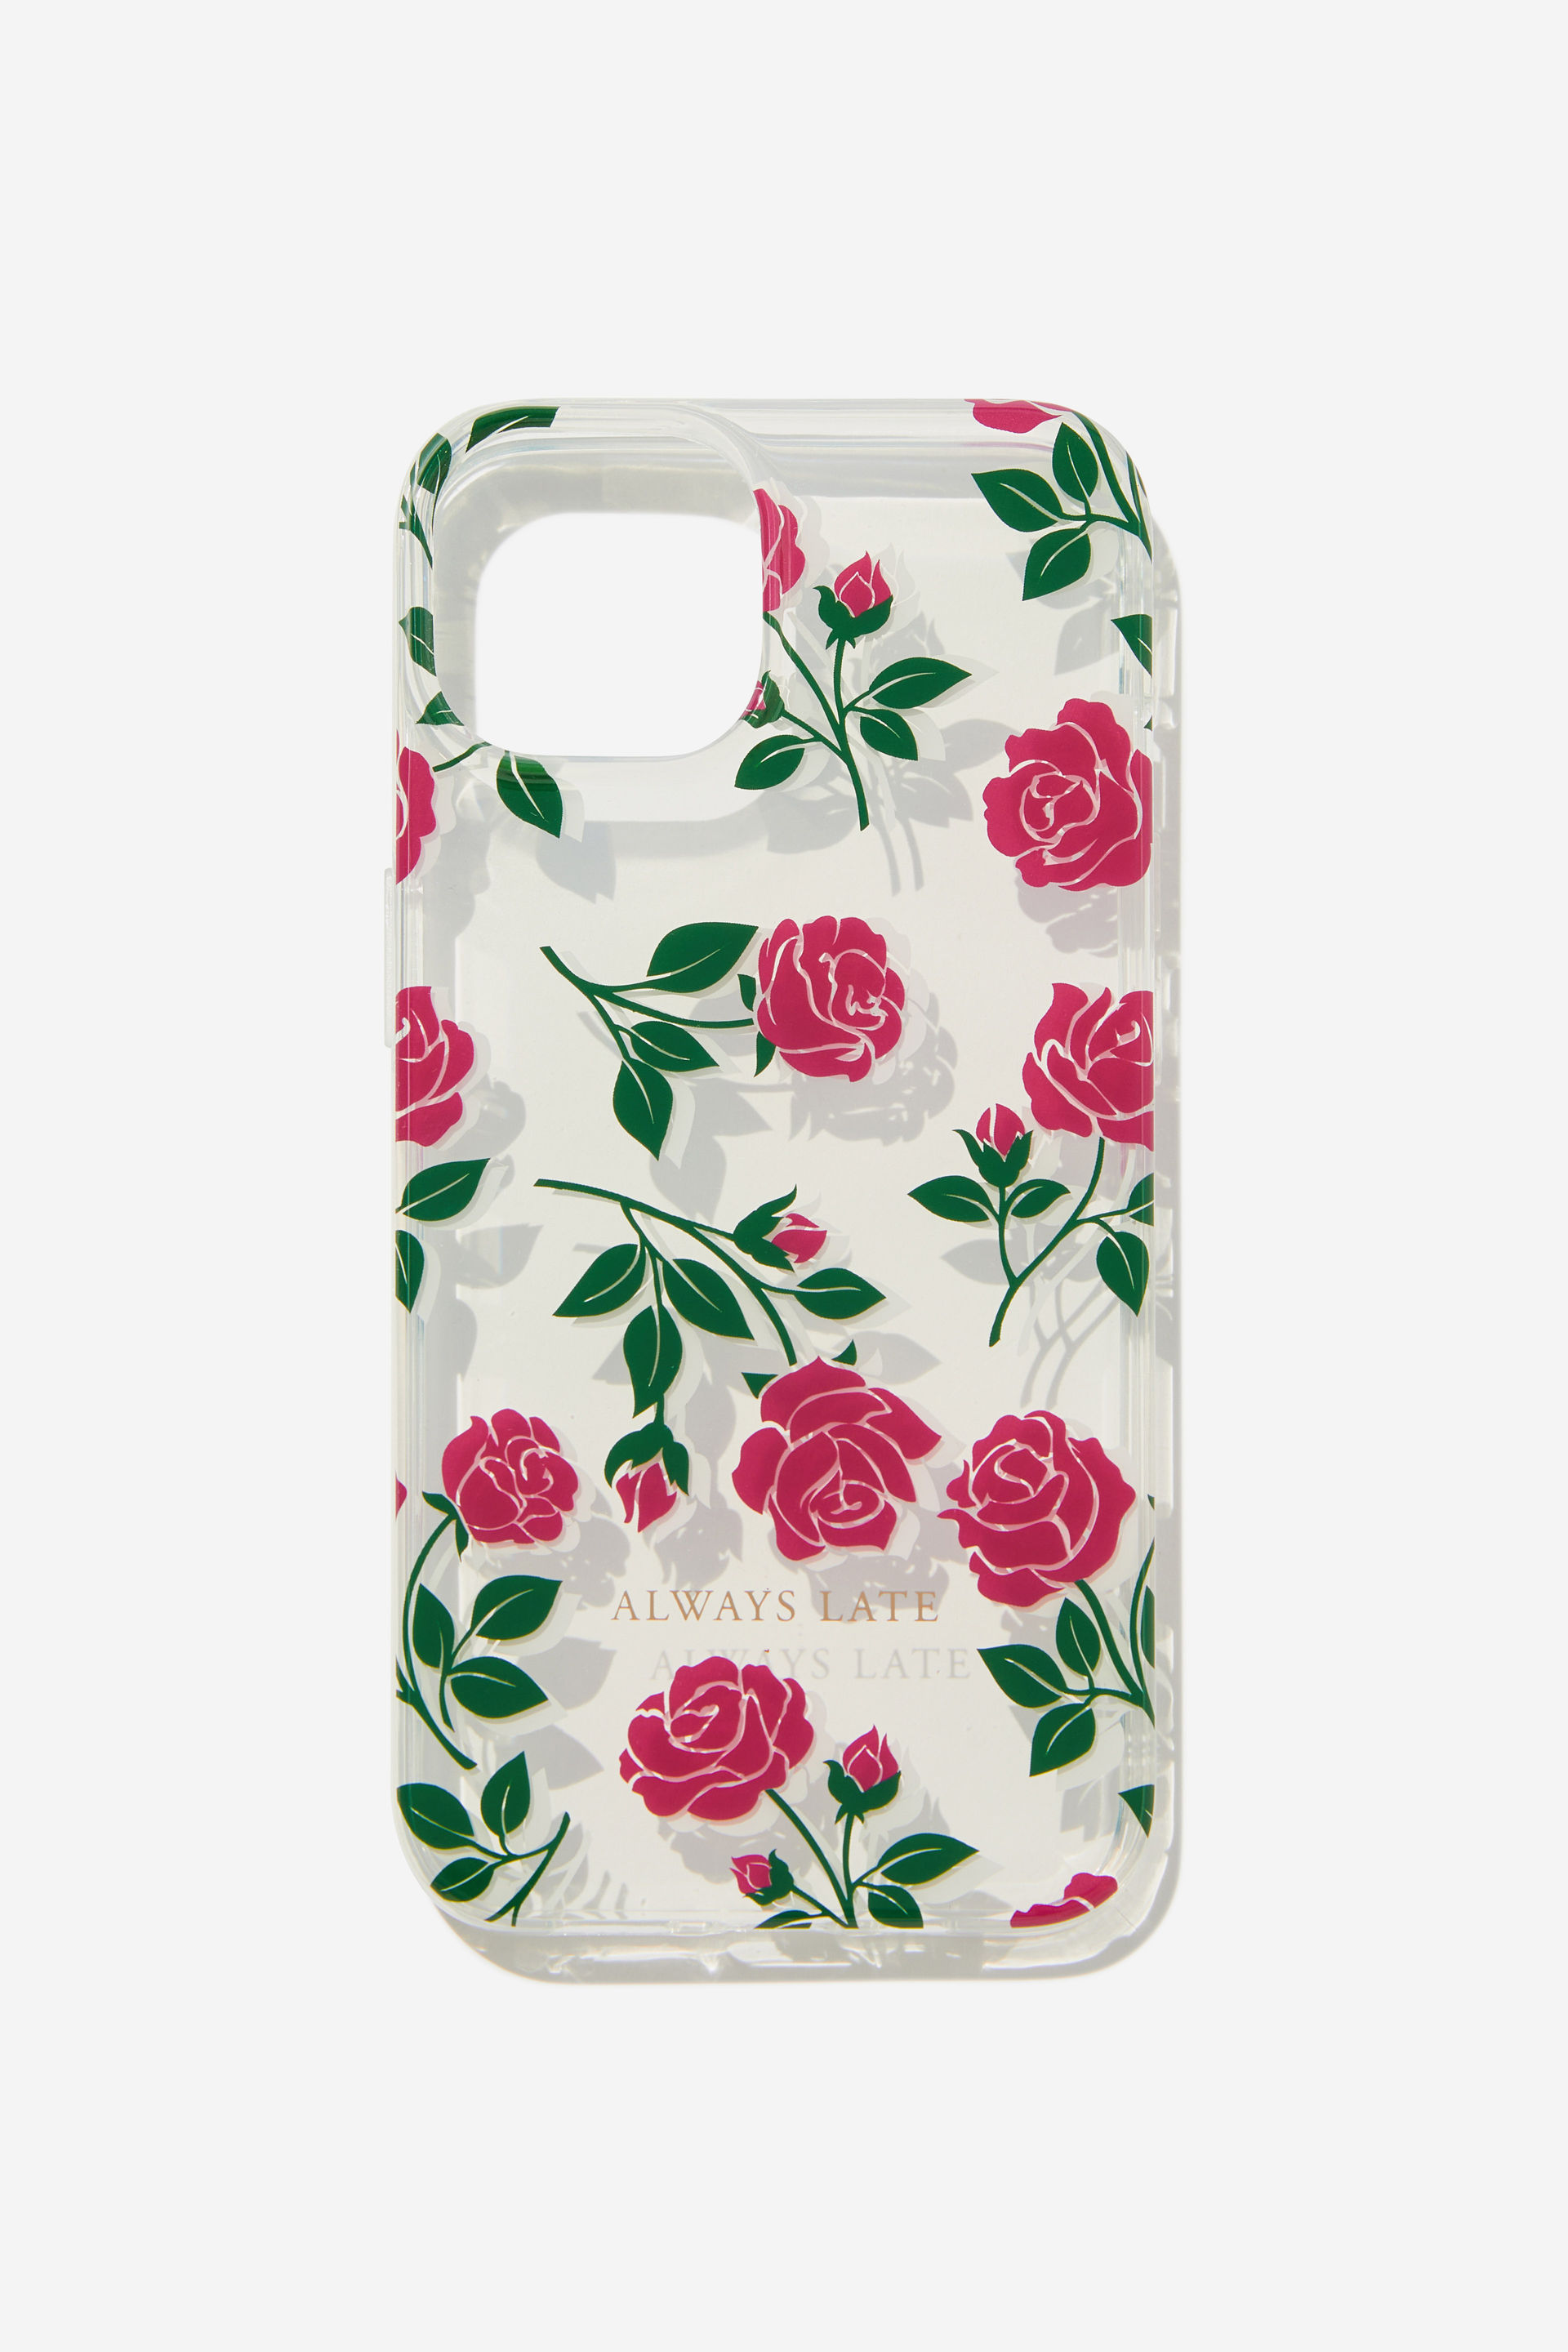 Typo - Graphic Phone Case Iphone 13-14 - Always late roses / clear